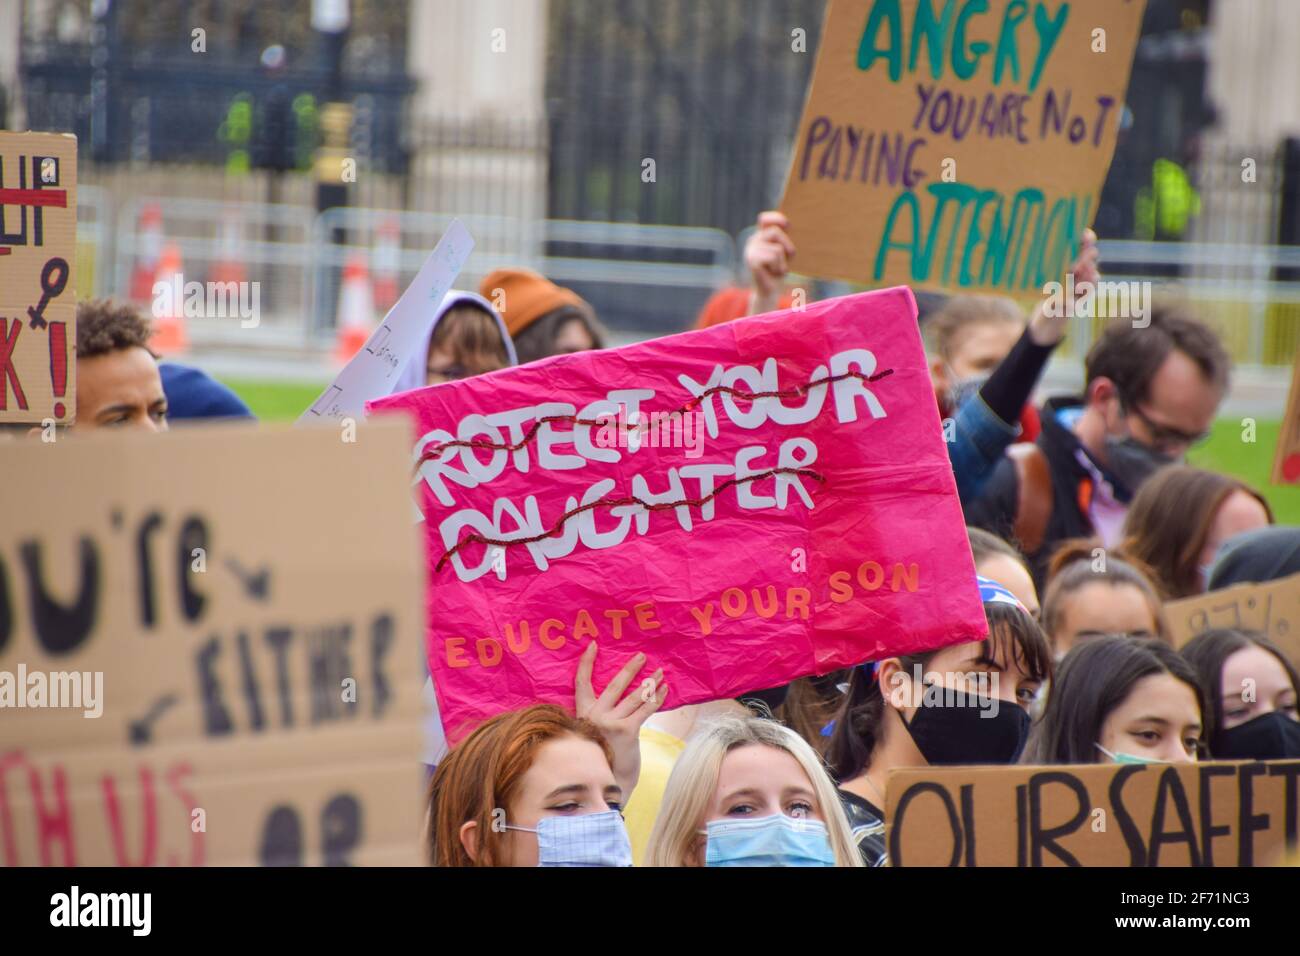 London, United Kingdom. 3rd April 2021. Hundreds of demonstrators gathered at Parliament Square for The 97% March to protest against harassment of women. Stock Photo